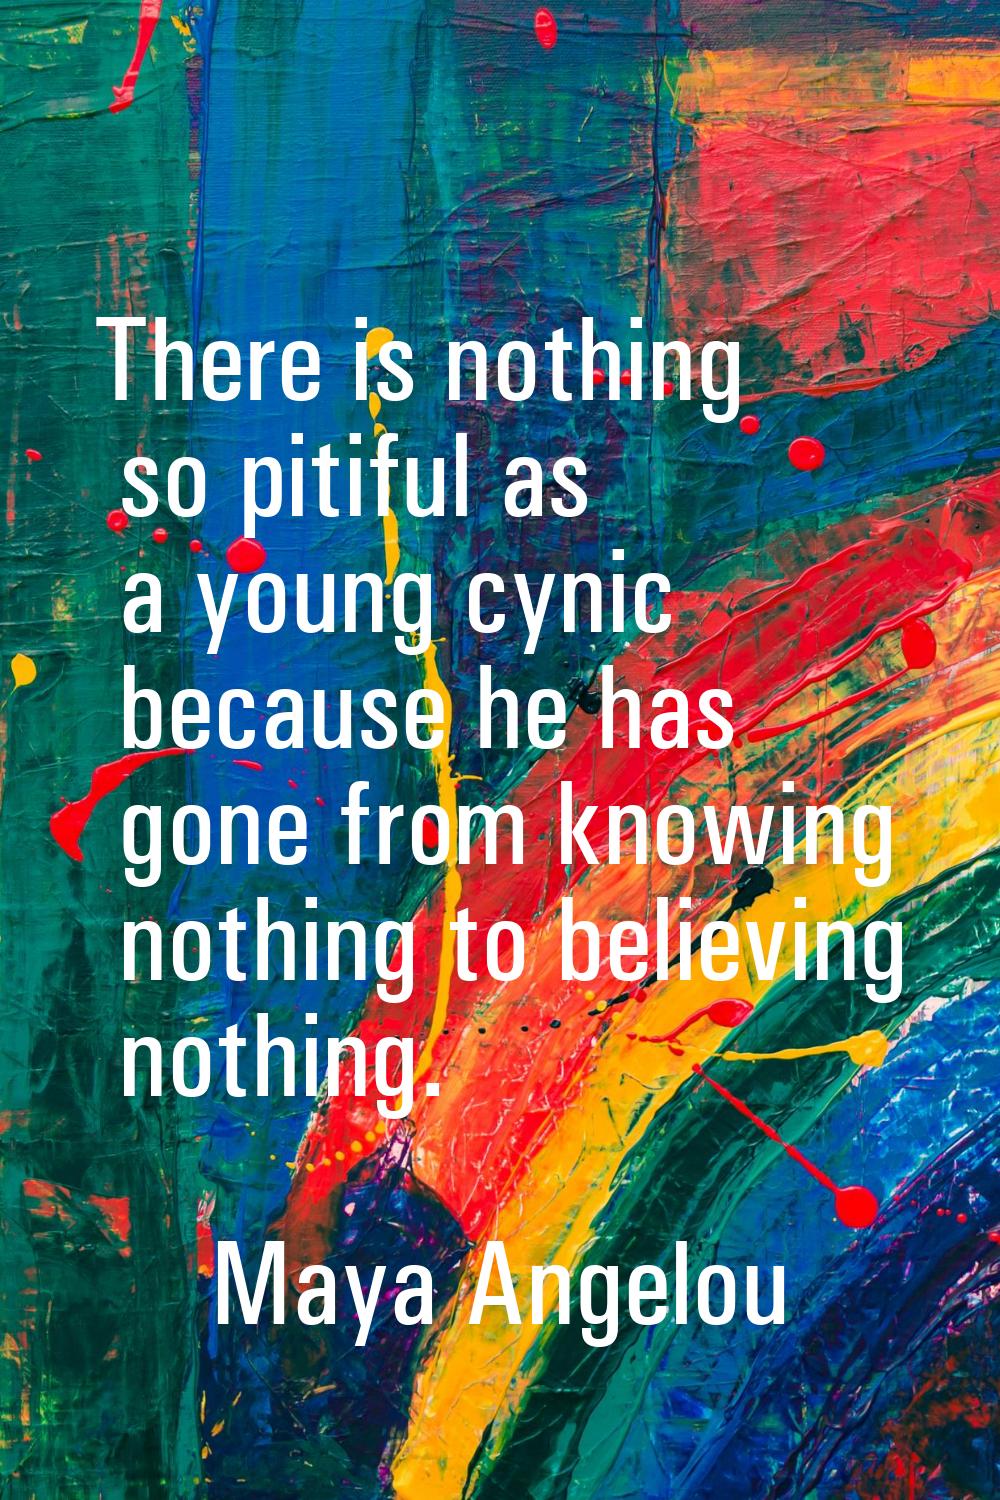 There is nothing so pitiful as a young cynic because he has gone from knowing nothing to believing 